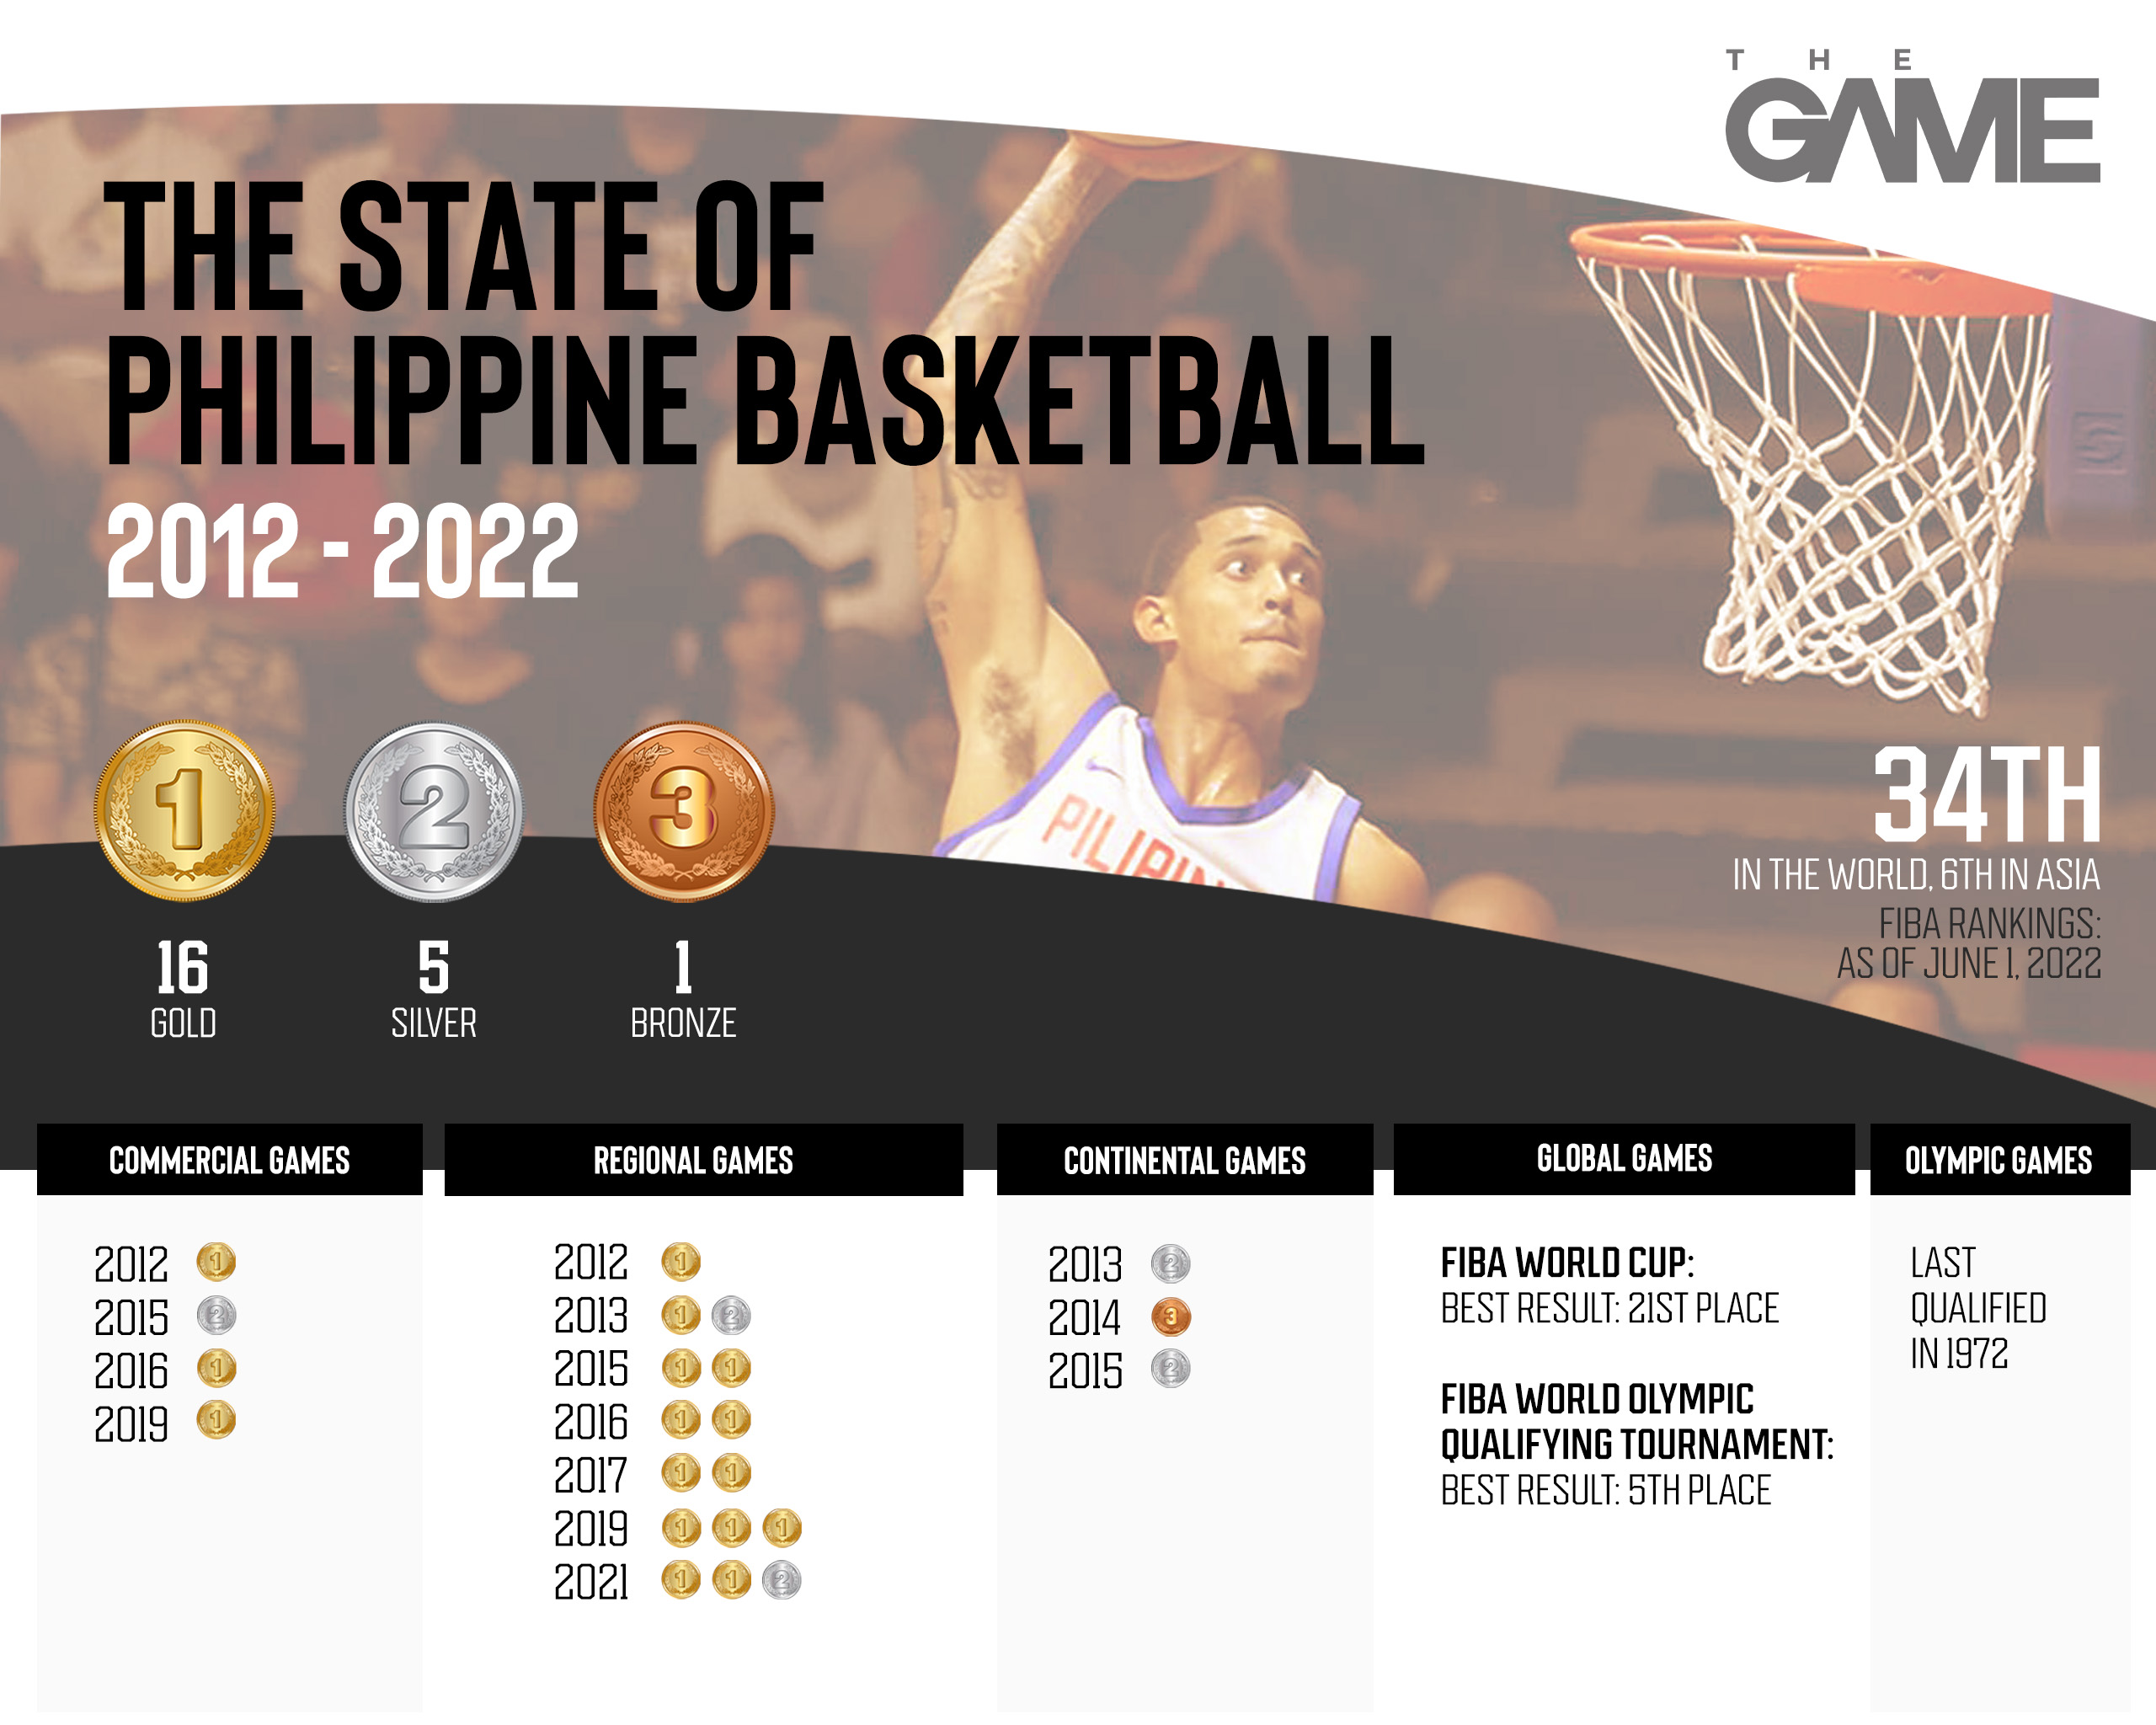 The Philippines' basketball medals from 2012 to 2022.